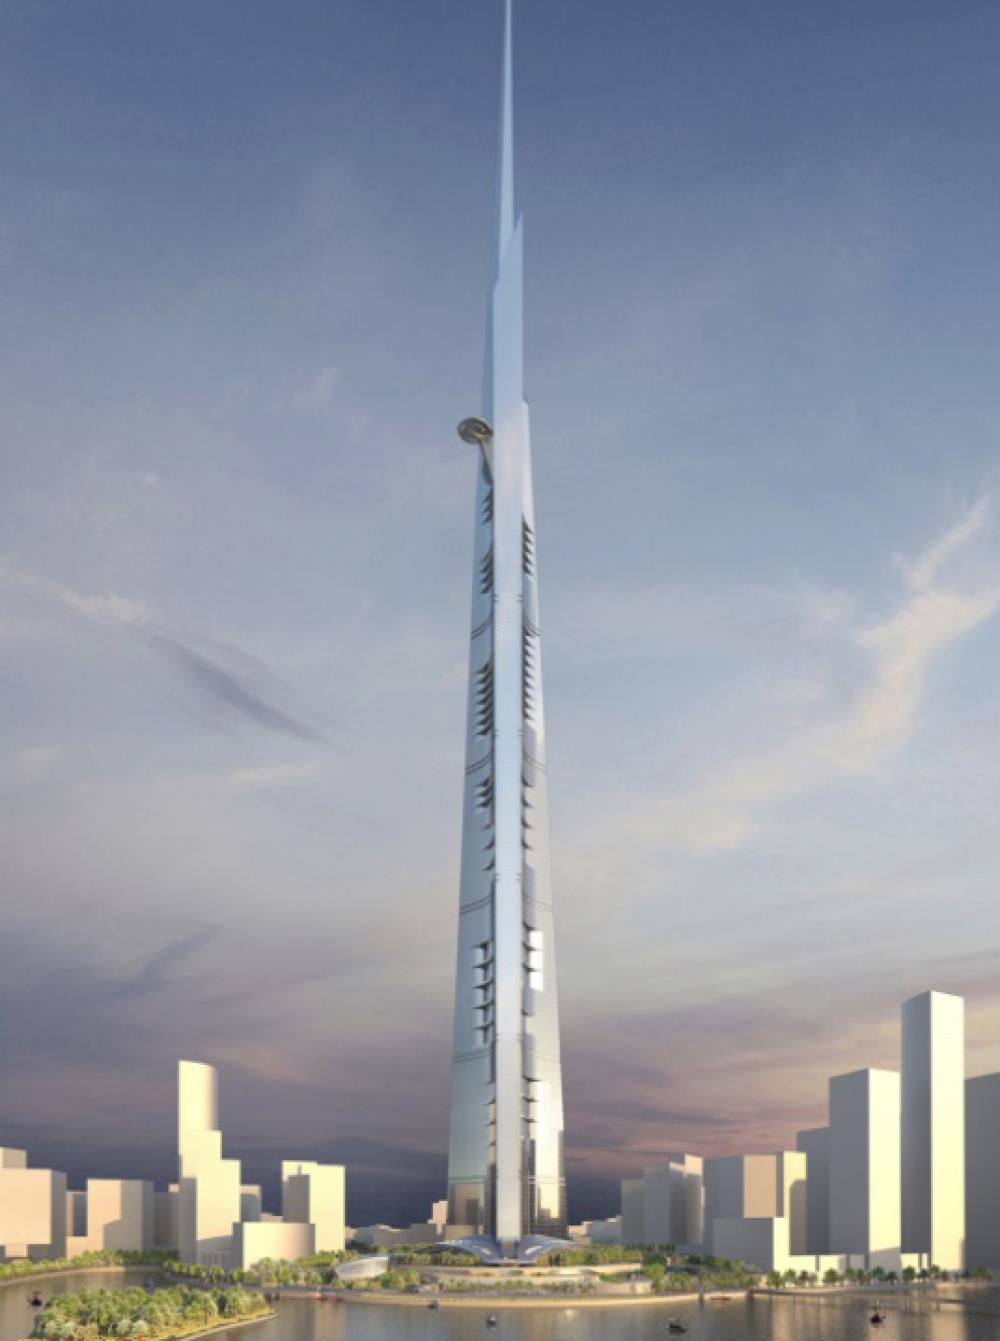 Figure 1. Jeddah Tower. Reprinted from Smith and Gills. http://smithgill.com/work/ jeddah_tower/